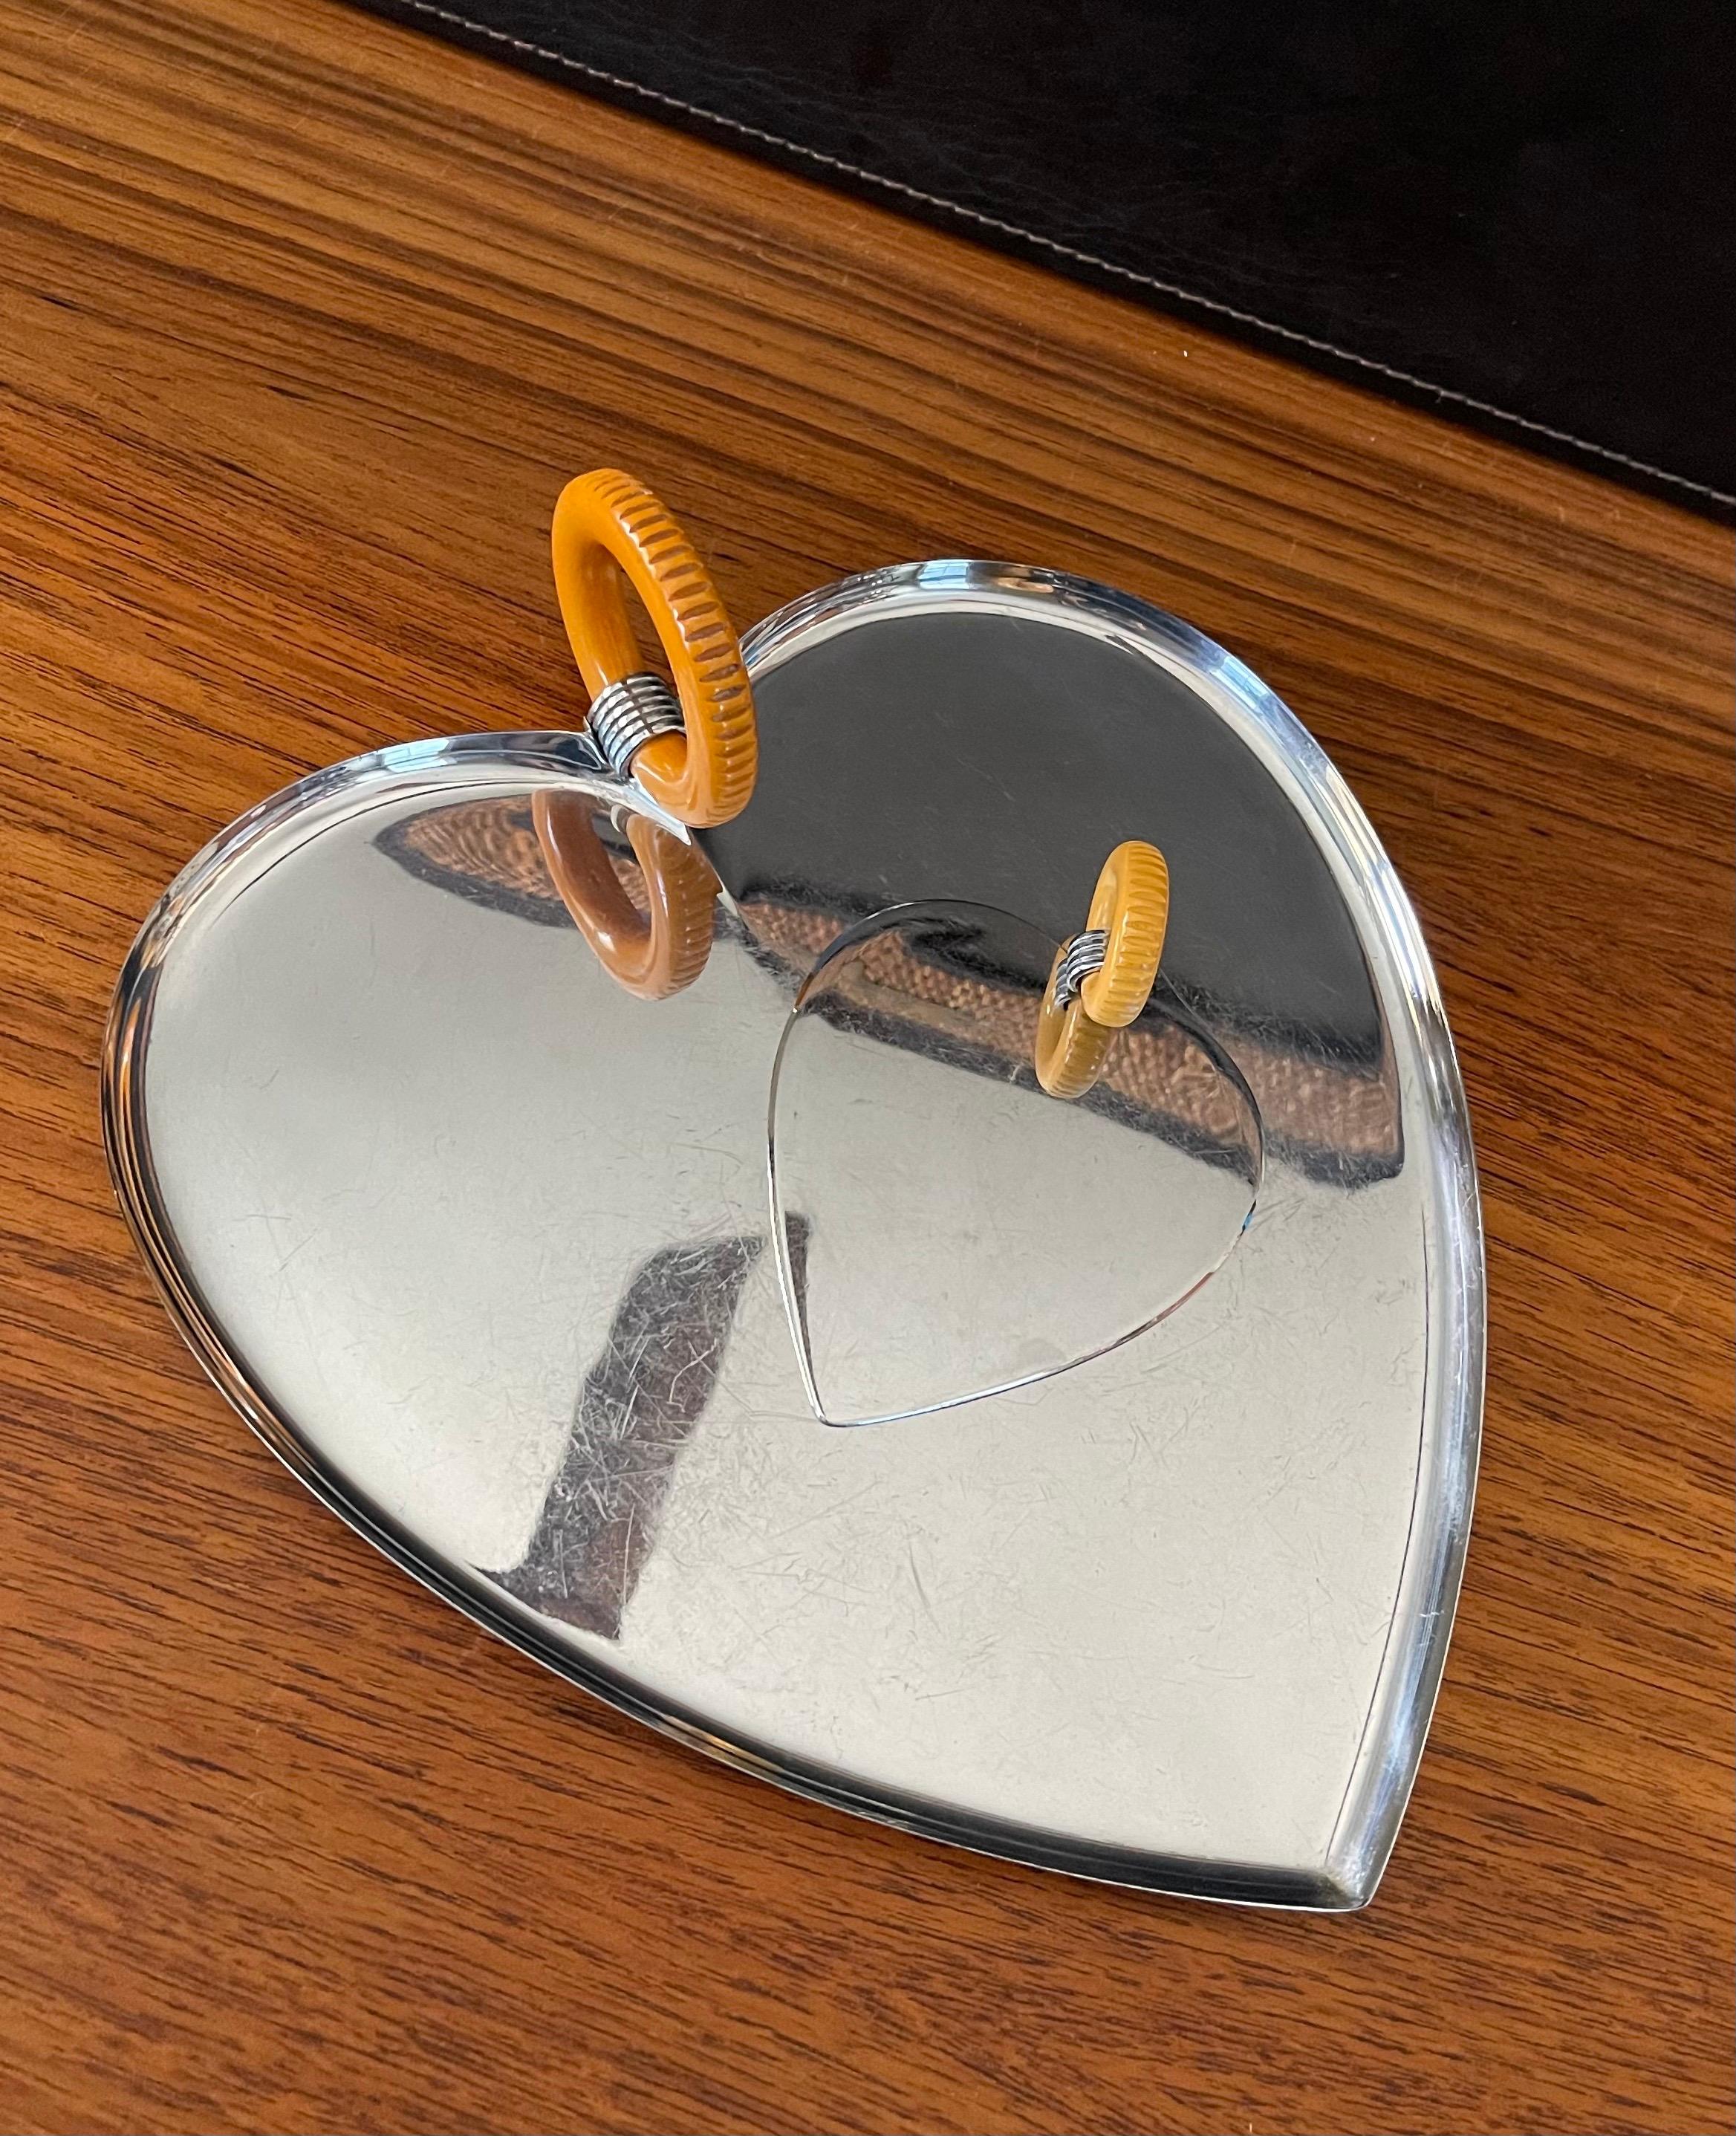 Art Deco chrome & bakelite heart tray and spatula by Chase Co., circa 1930s. The large tray (10.75